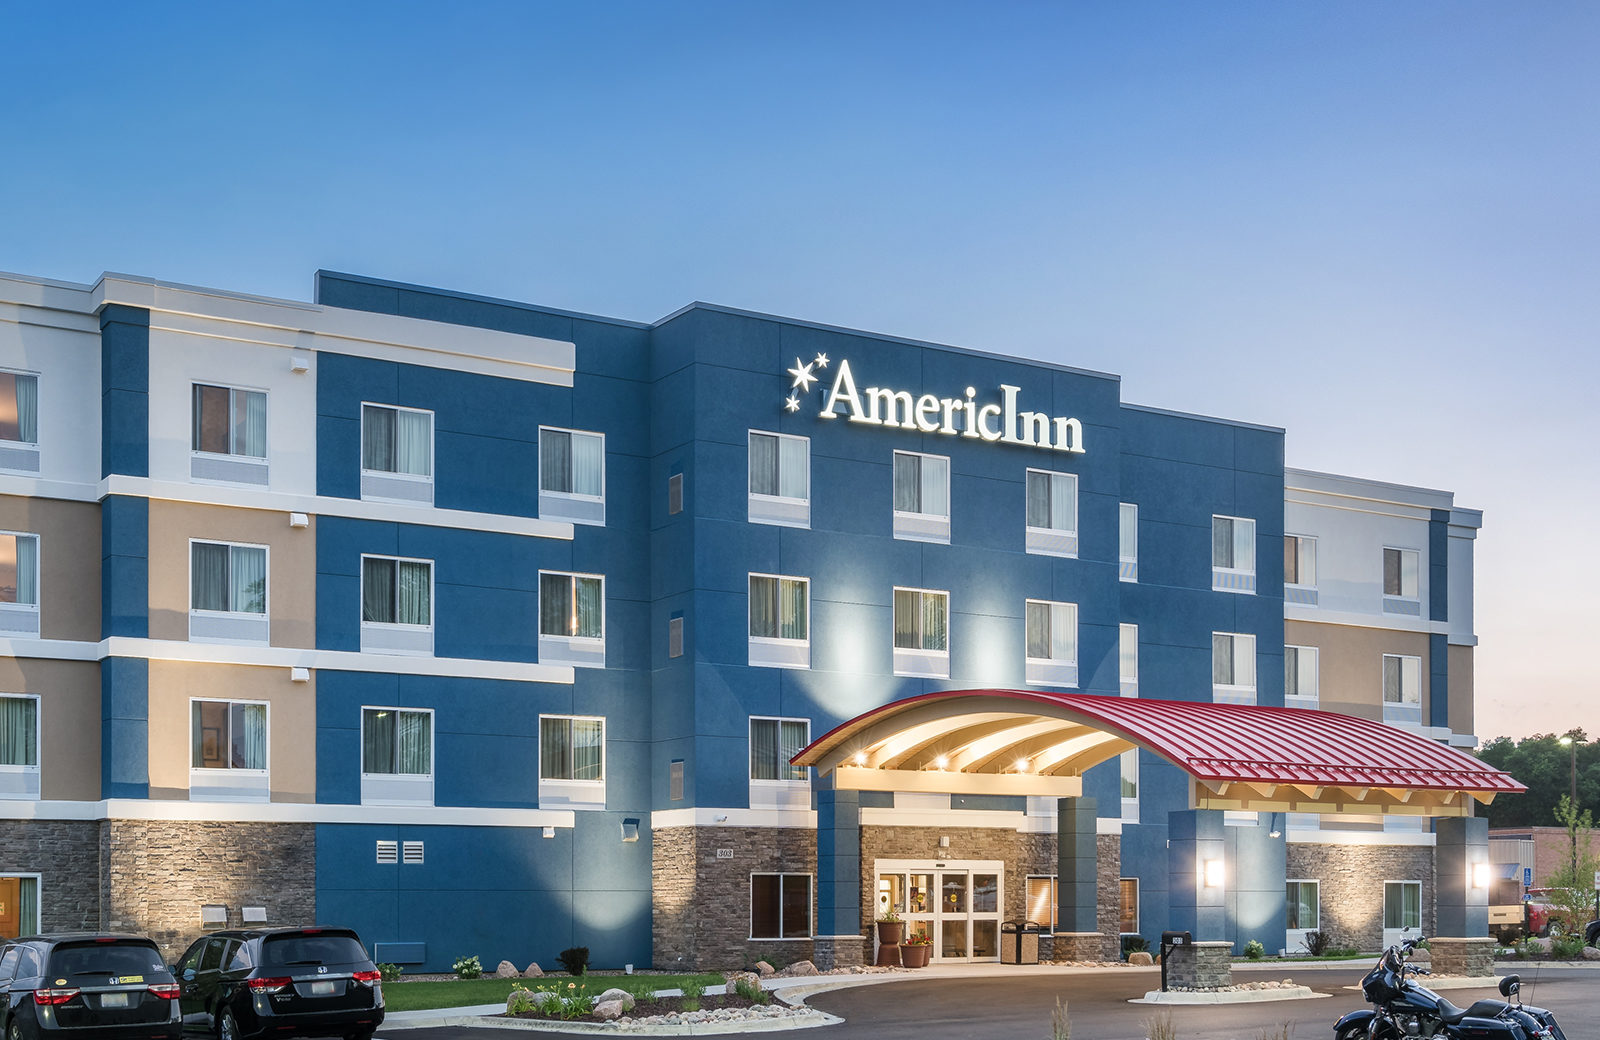 Educators who are members of The American Federation of Teachers save 20% on hotel stays at Wyndham brand hotels including Days Inn, Baymont, AmericInn, Hawthorn Suites, Howard Johnson, La Quinta, Microtel, Ramada, Super 8, Travelodge, Wingate, Wyndham, Wyndham Garden, and Wyndham Grand.